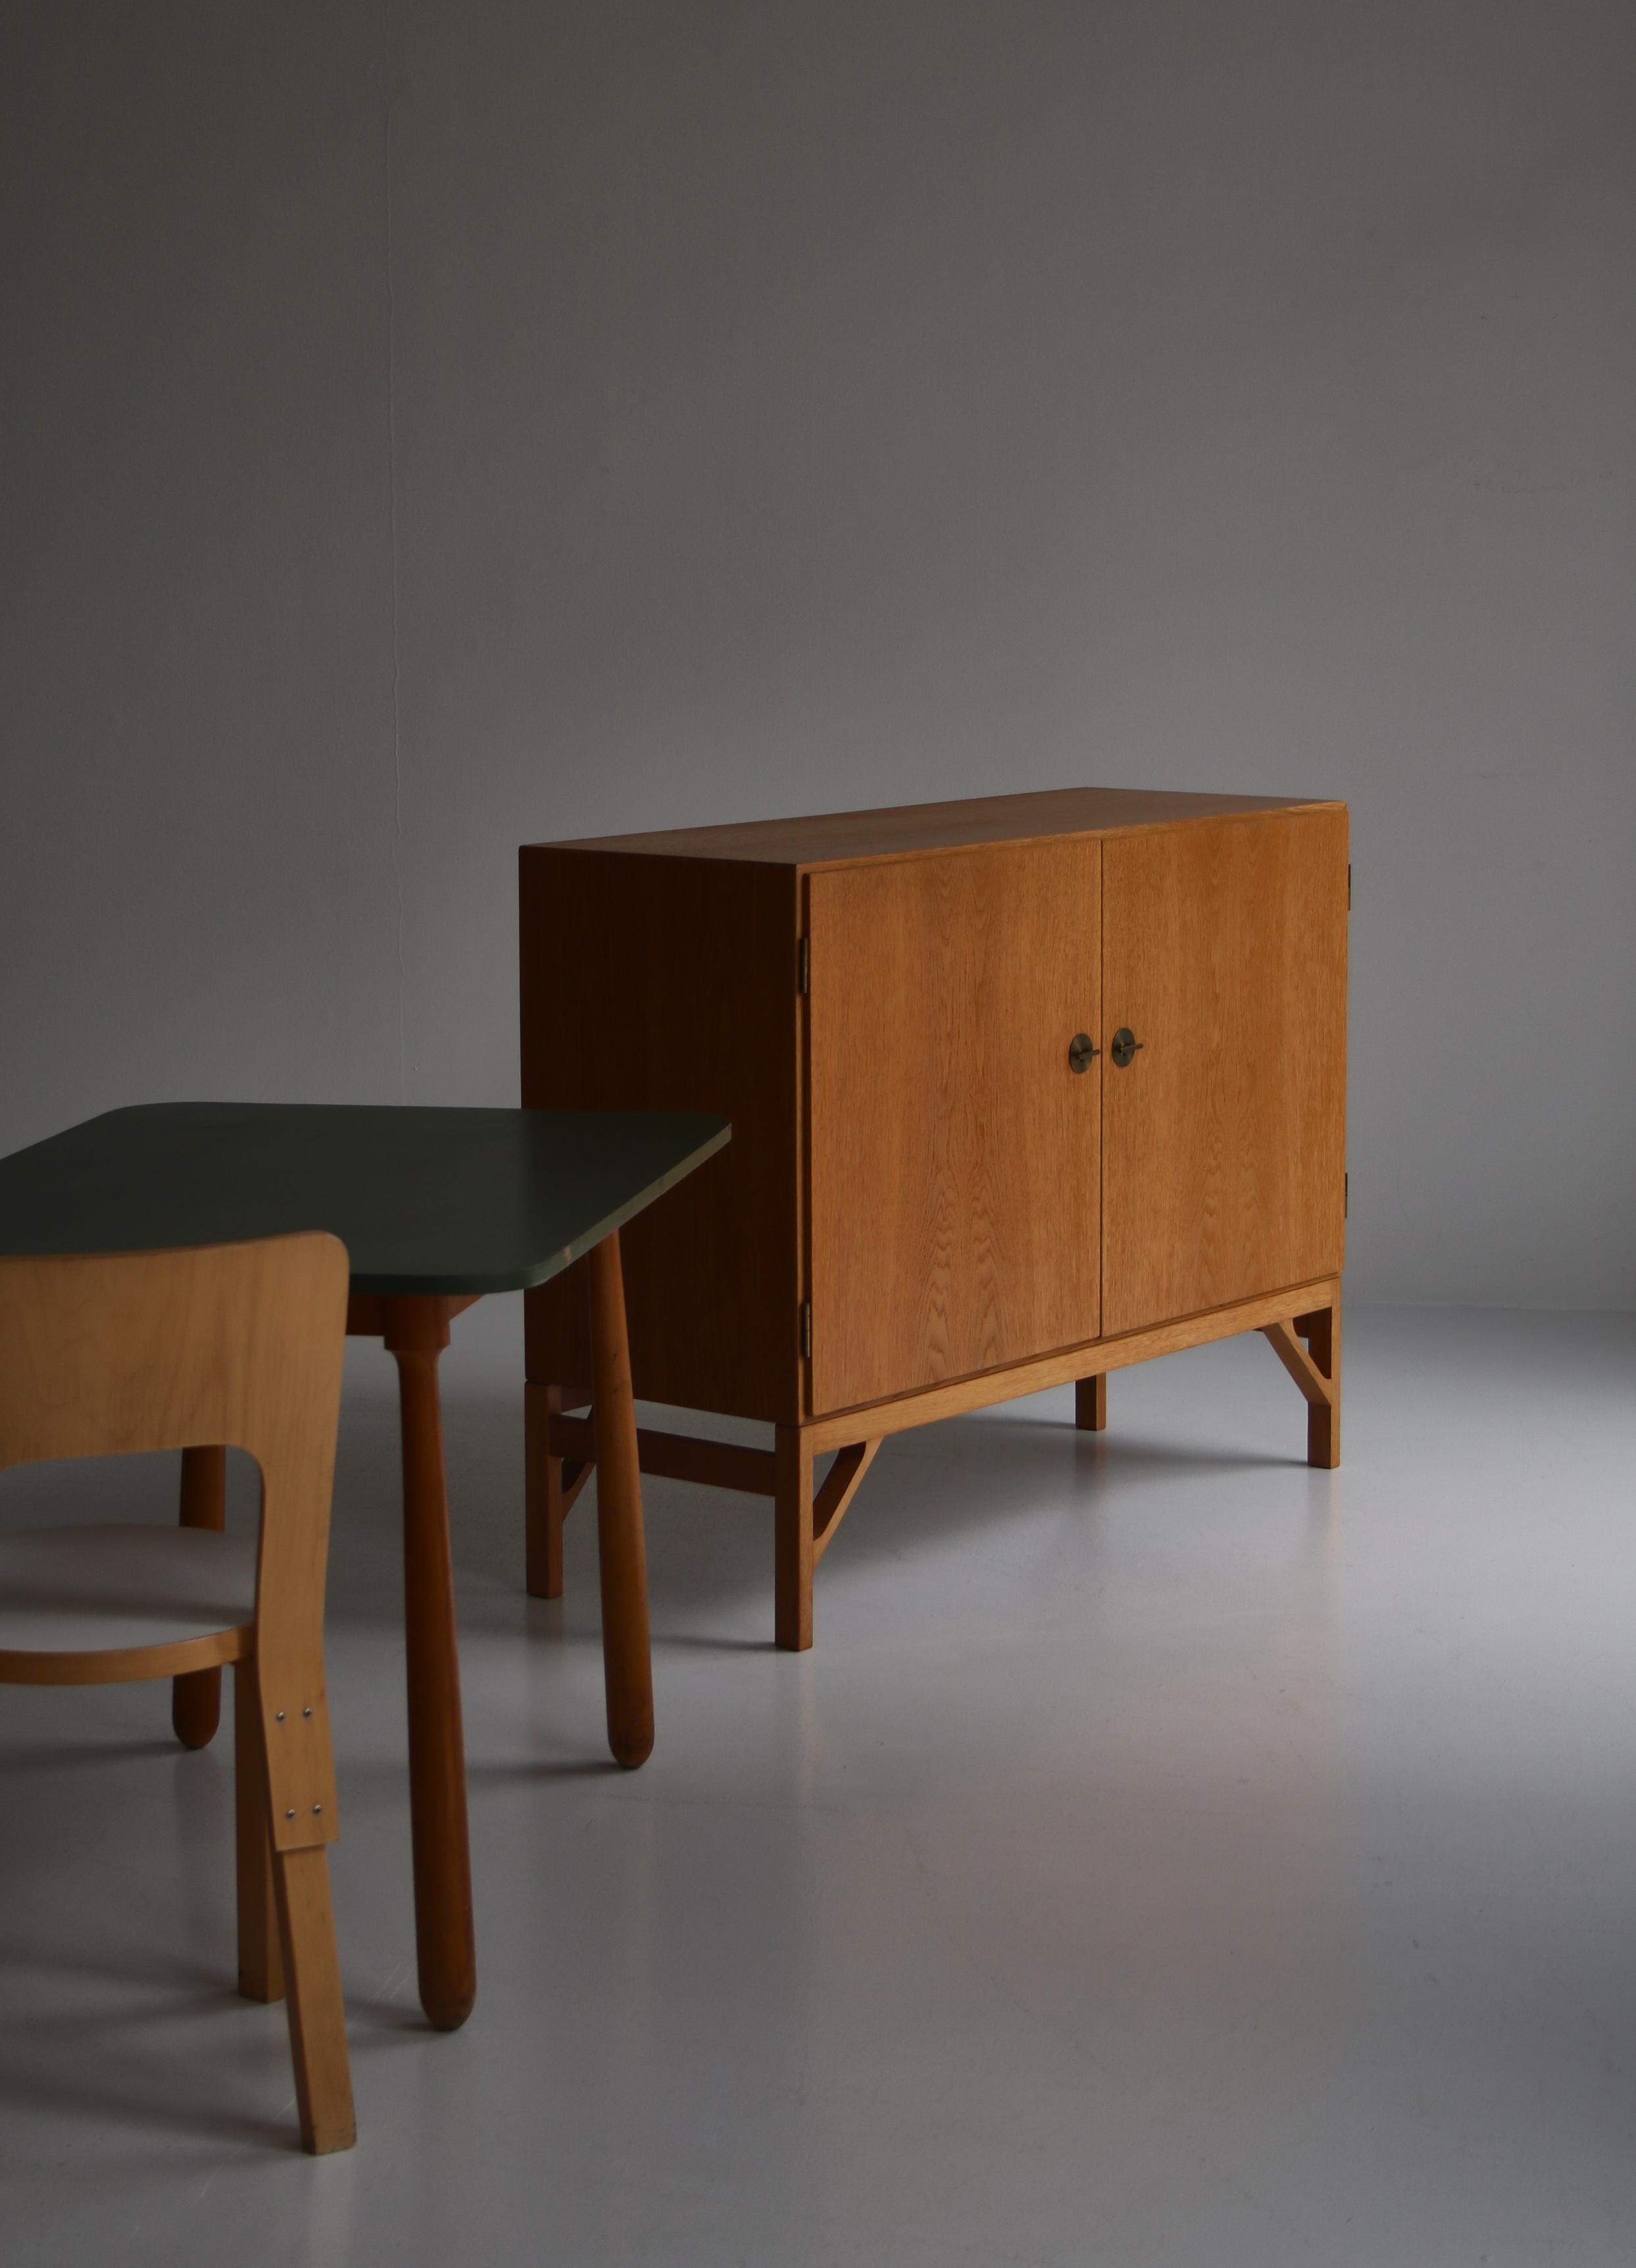 Wonderful 'China' cabinet all in oak with maple interior. Beautiful keys and handles in brass. Designed by Børge Mogensen in 1960 and produced by cabinetmaker C.M. Madsens for FDB Møbler, Denmark. This cabinet is beautifully patinated and has only